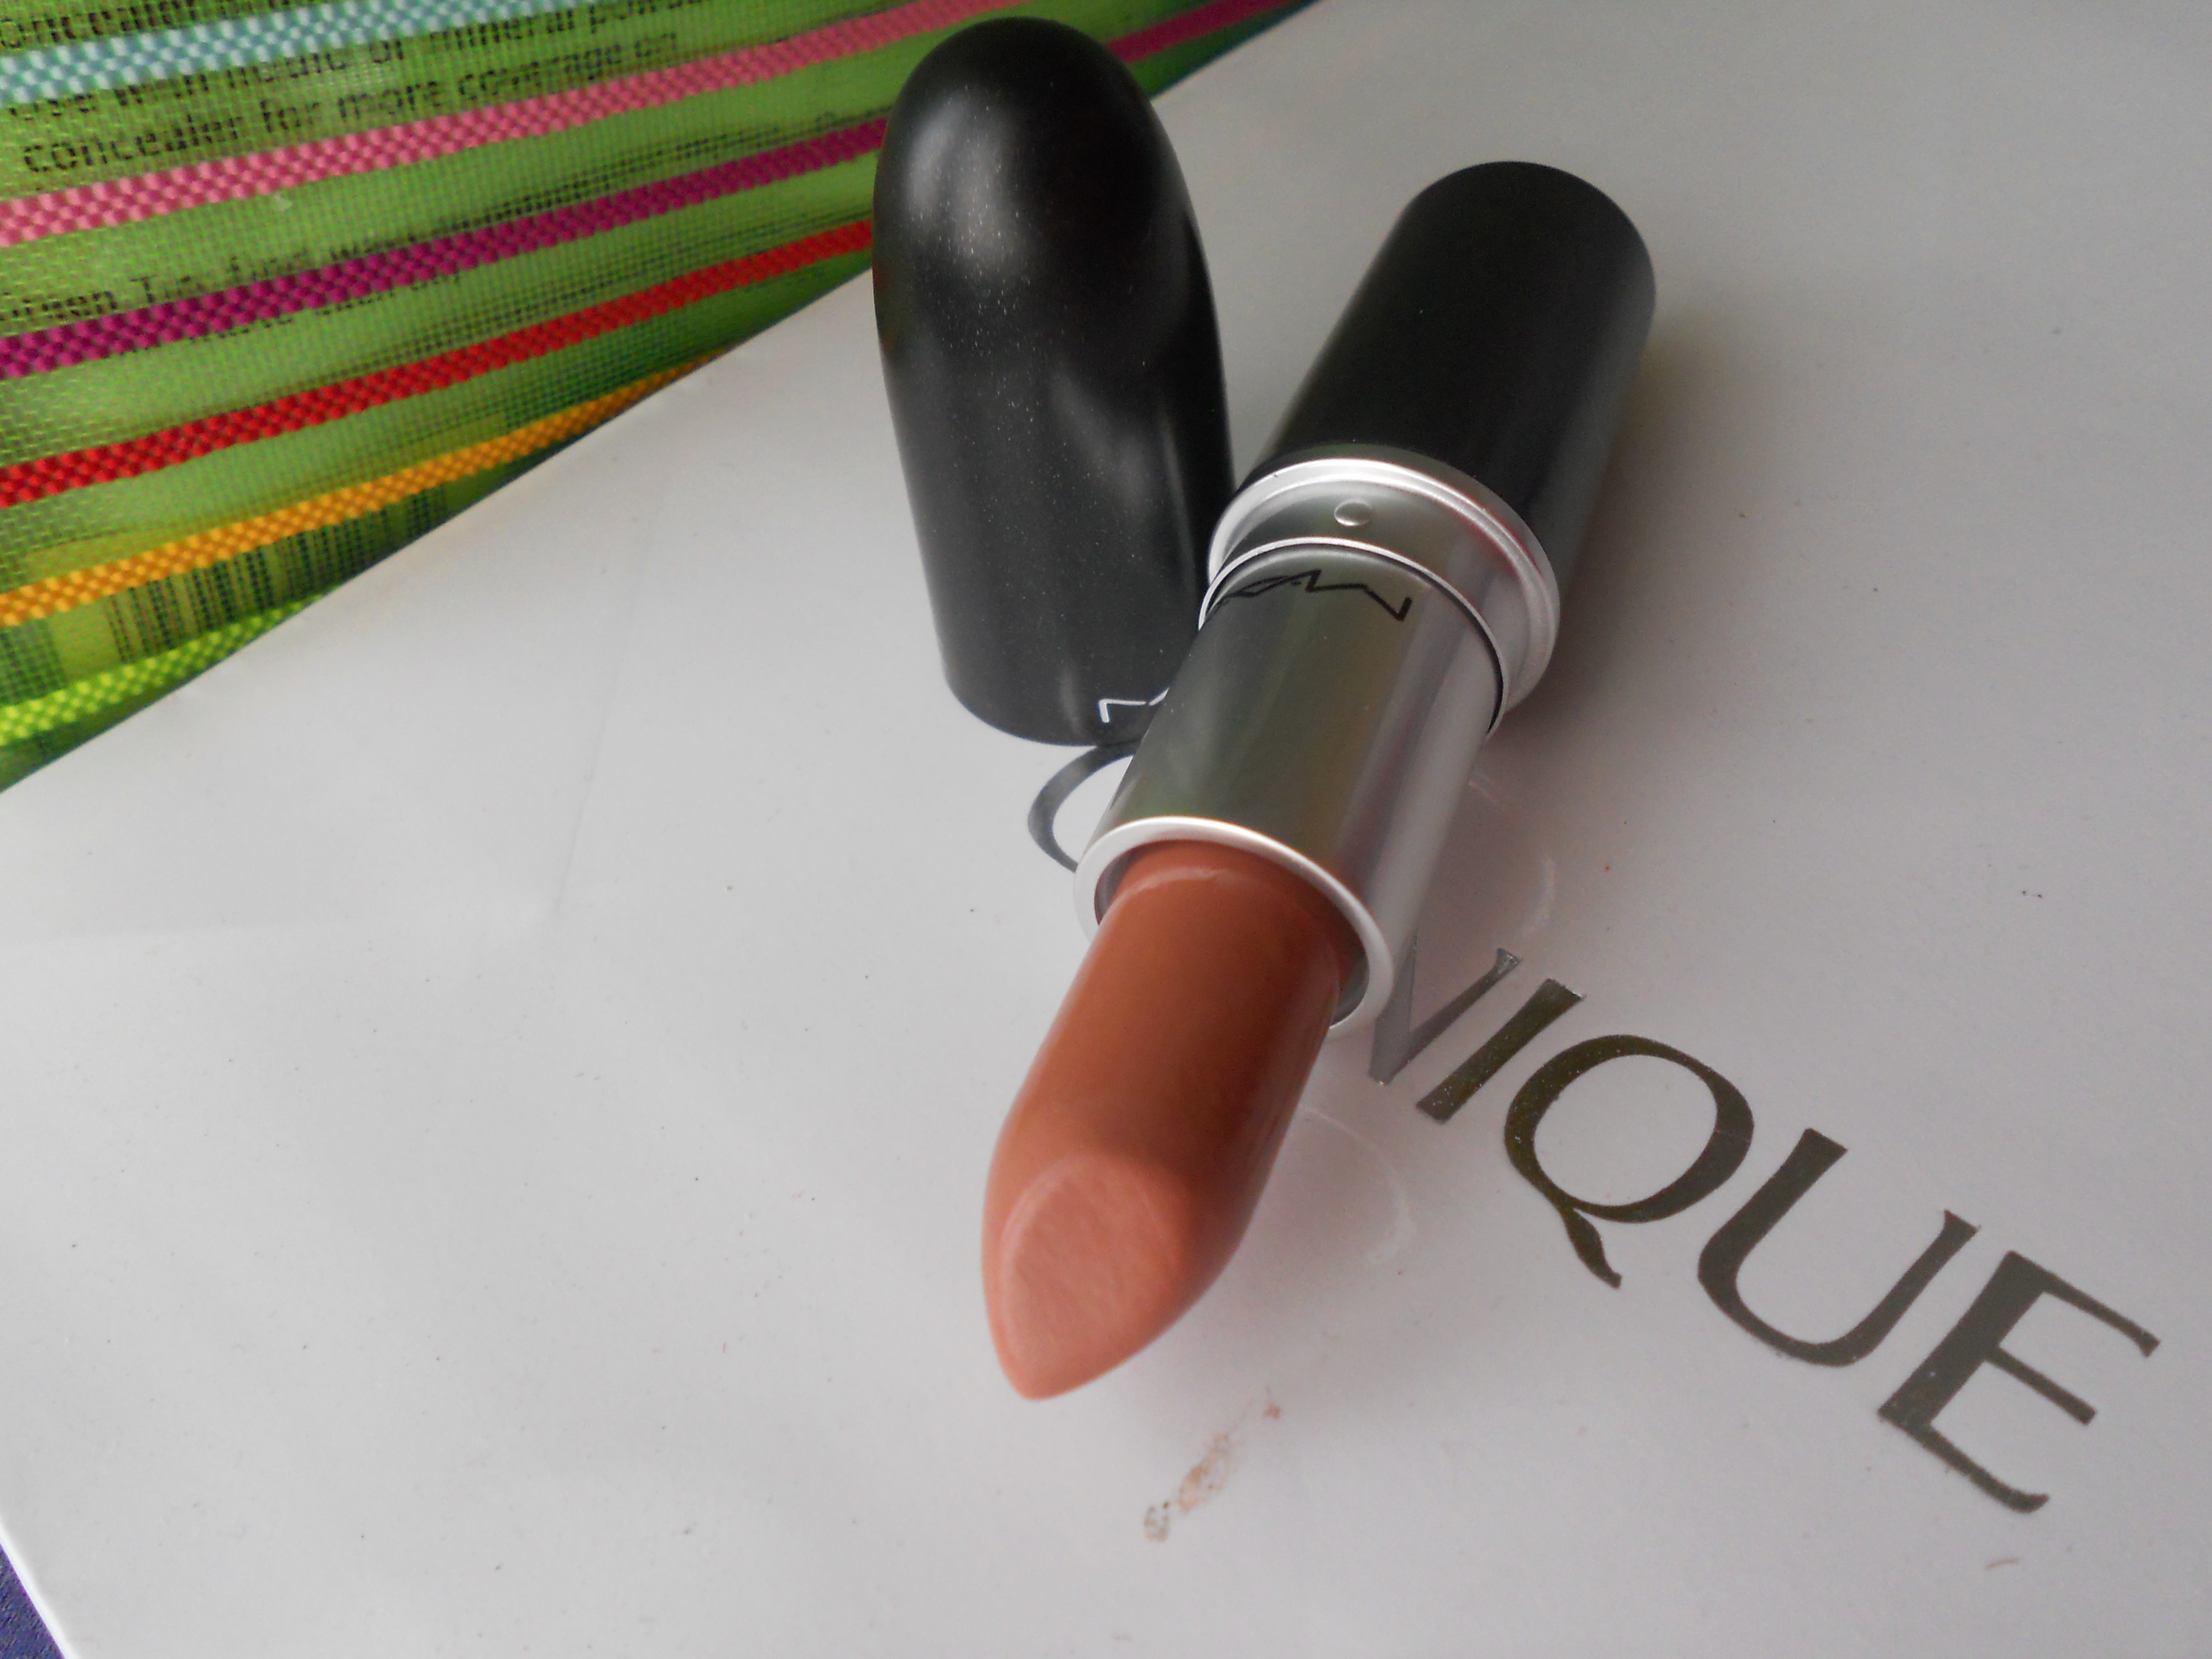 MAC Yash Lipstick Review & Swatches